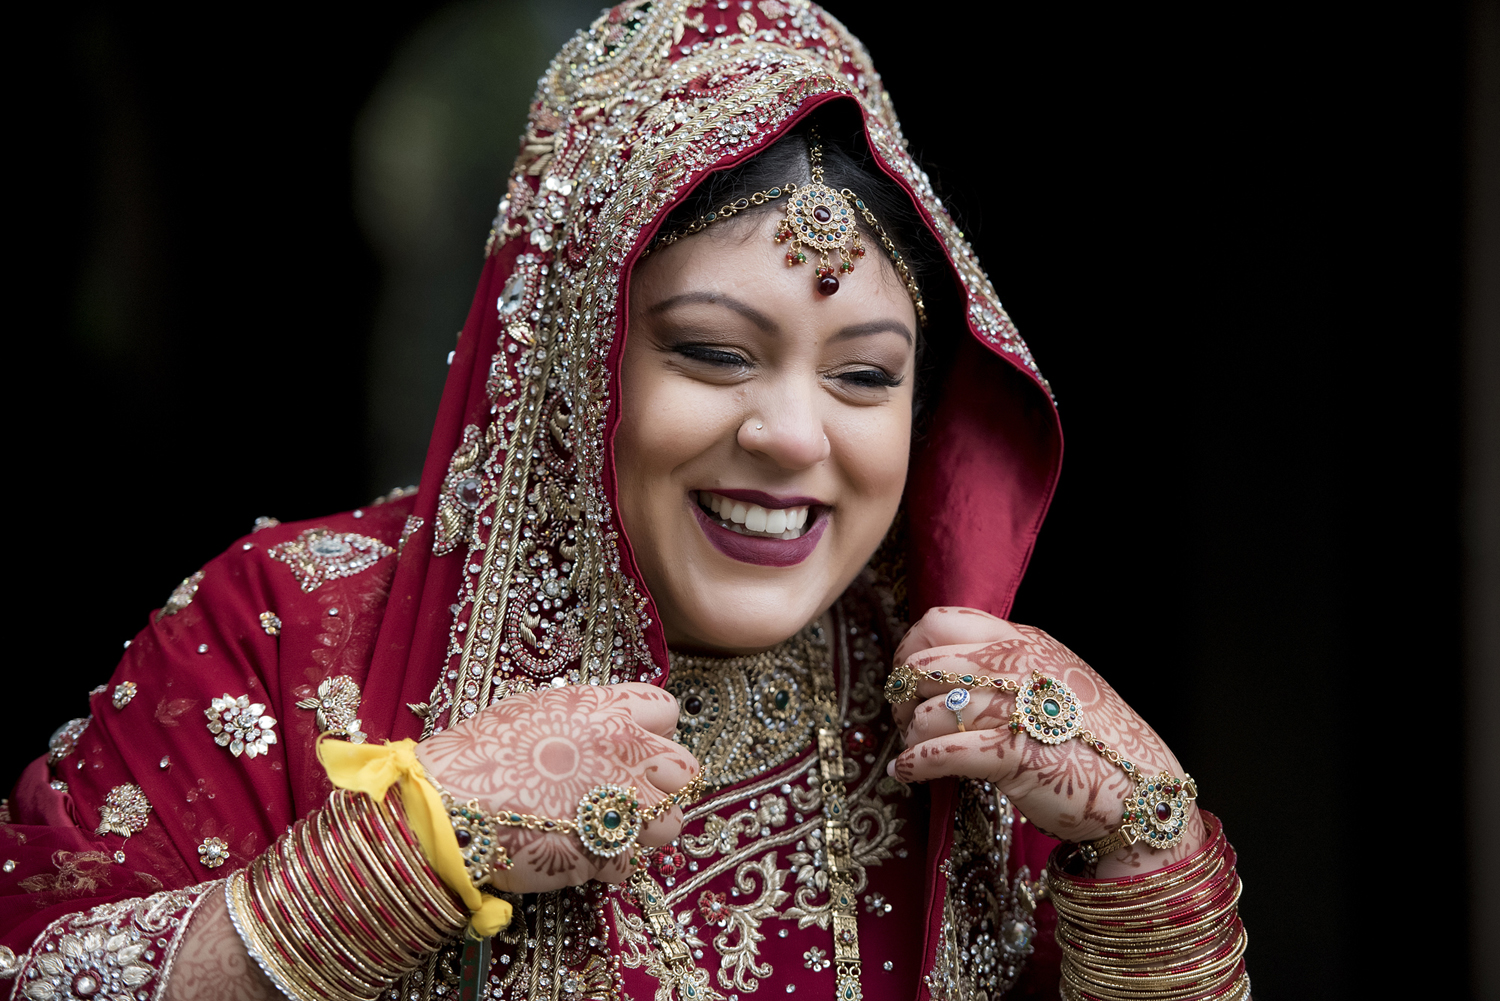 Hindu bride laughing as she adjusts her red and gold outfit